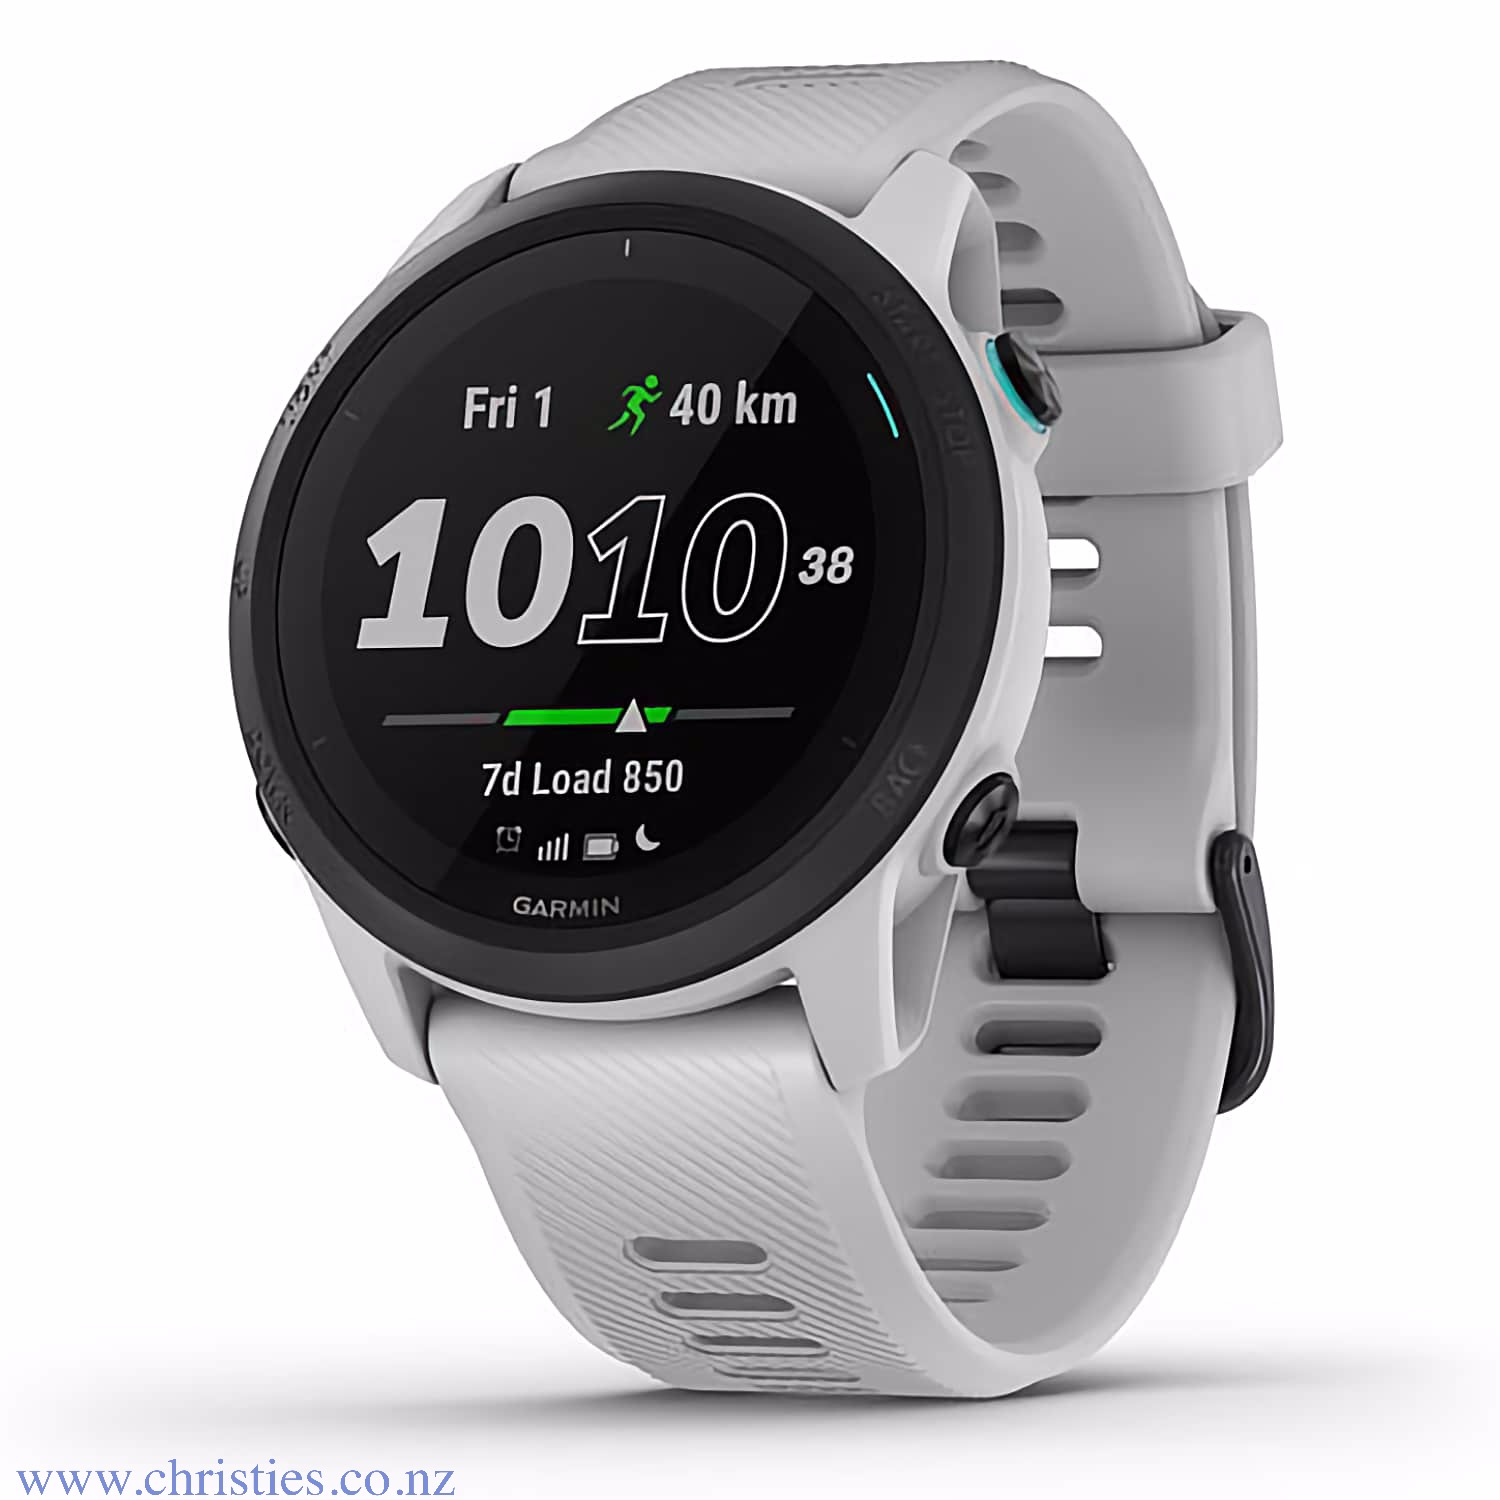 Garmin Forerunner 745 GPS Whitestone Sports Watch. CHASE DOWN NEW PBs - The new Garmin Forerunner 745 GPS running watch is made for runners and triathletes like you who need detailed training stats and on-device workouts plus smartwatch functions. Swim, b